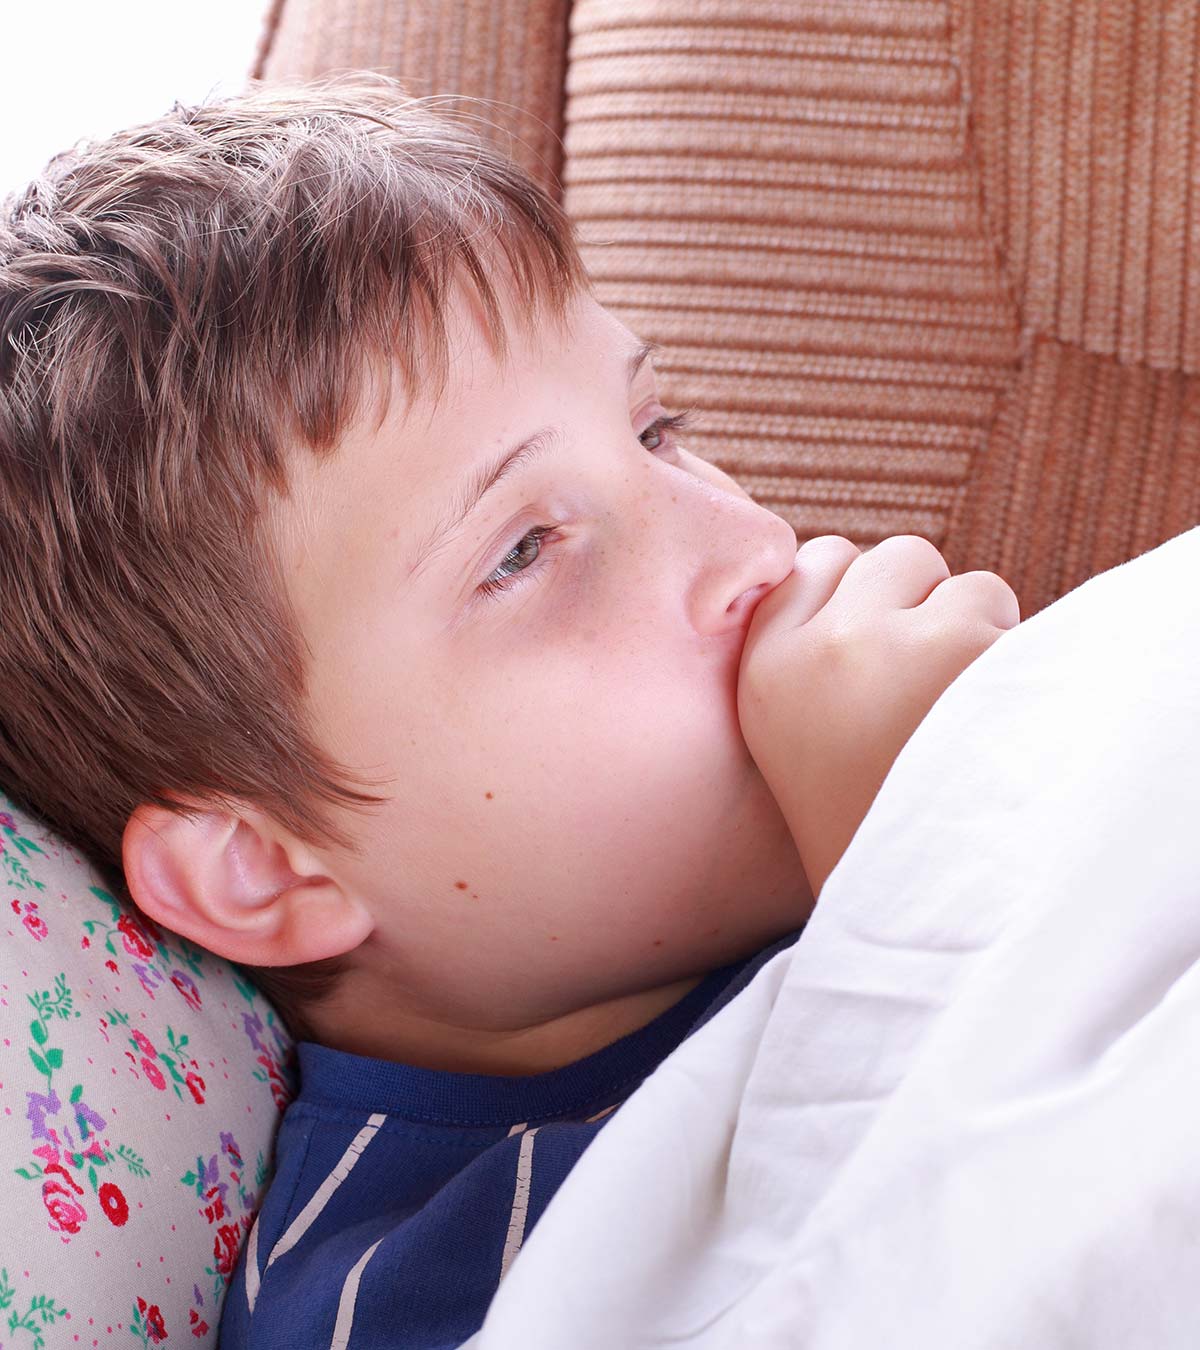 Tuberculosis In Children: Symptoms, Causes And Treatment